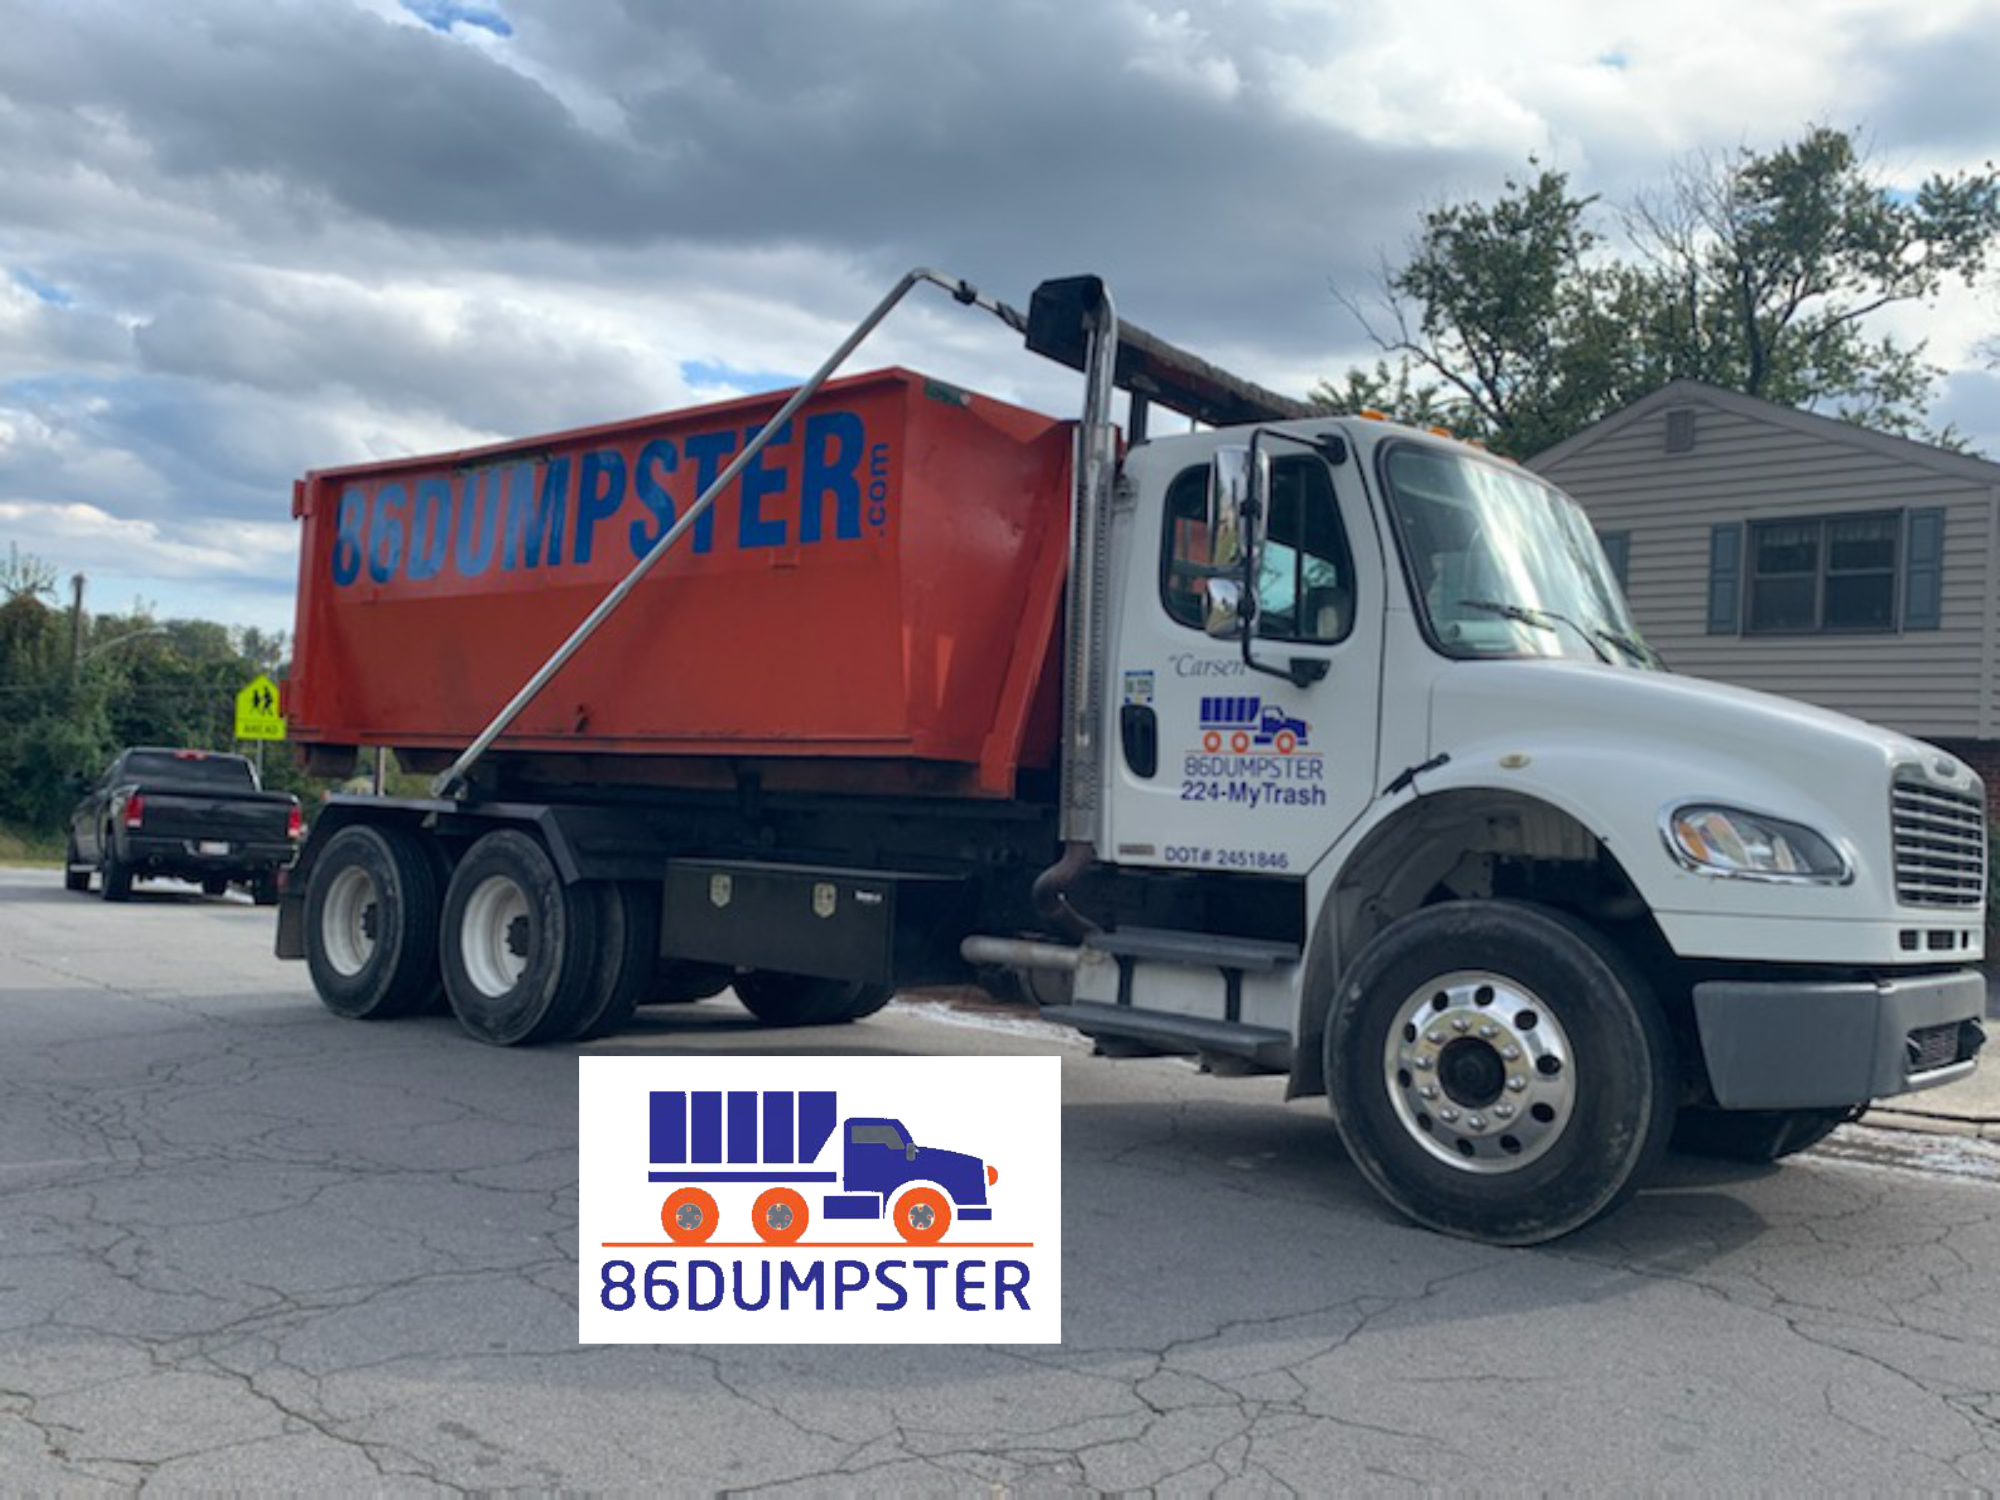 Book a Dumpster Rental 86 Dumpster Essex MD and Contractors Use for All Projects